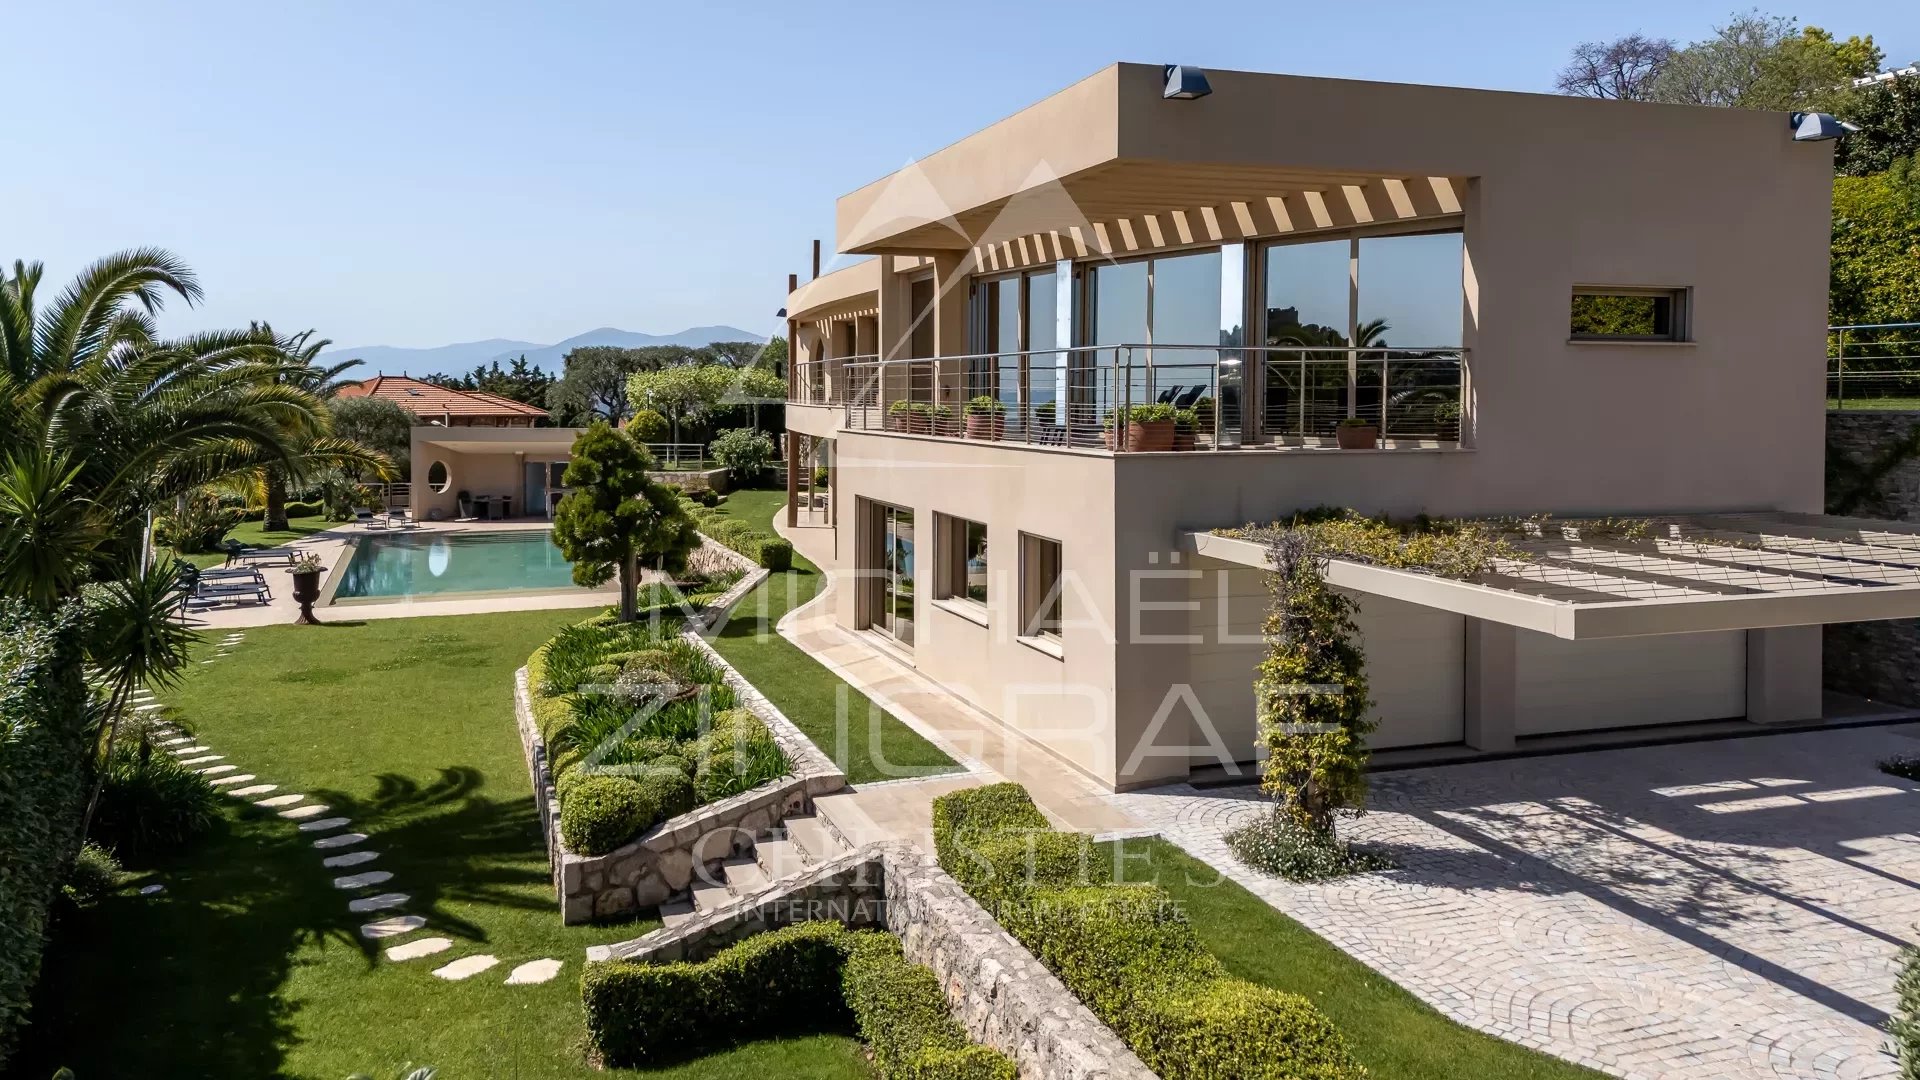 Col de Villefranche-sur-Mer - Large modern property with panoramic sea view over the bay of Villefranche and Cap Ferrat